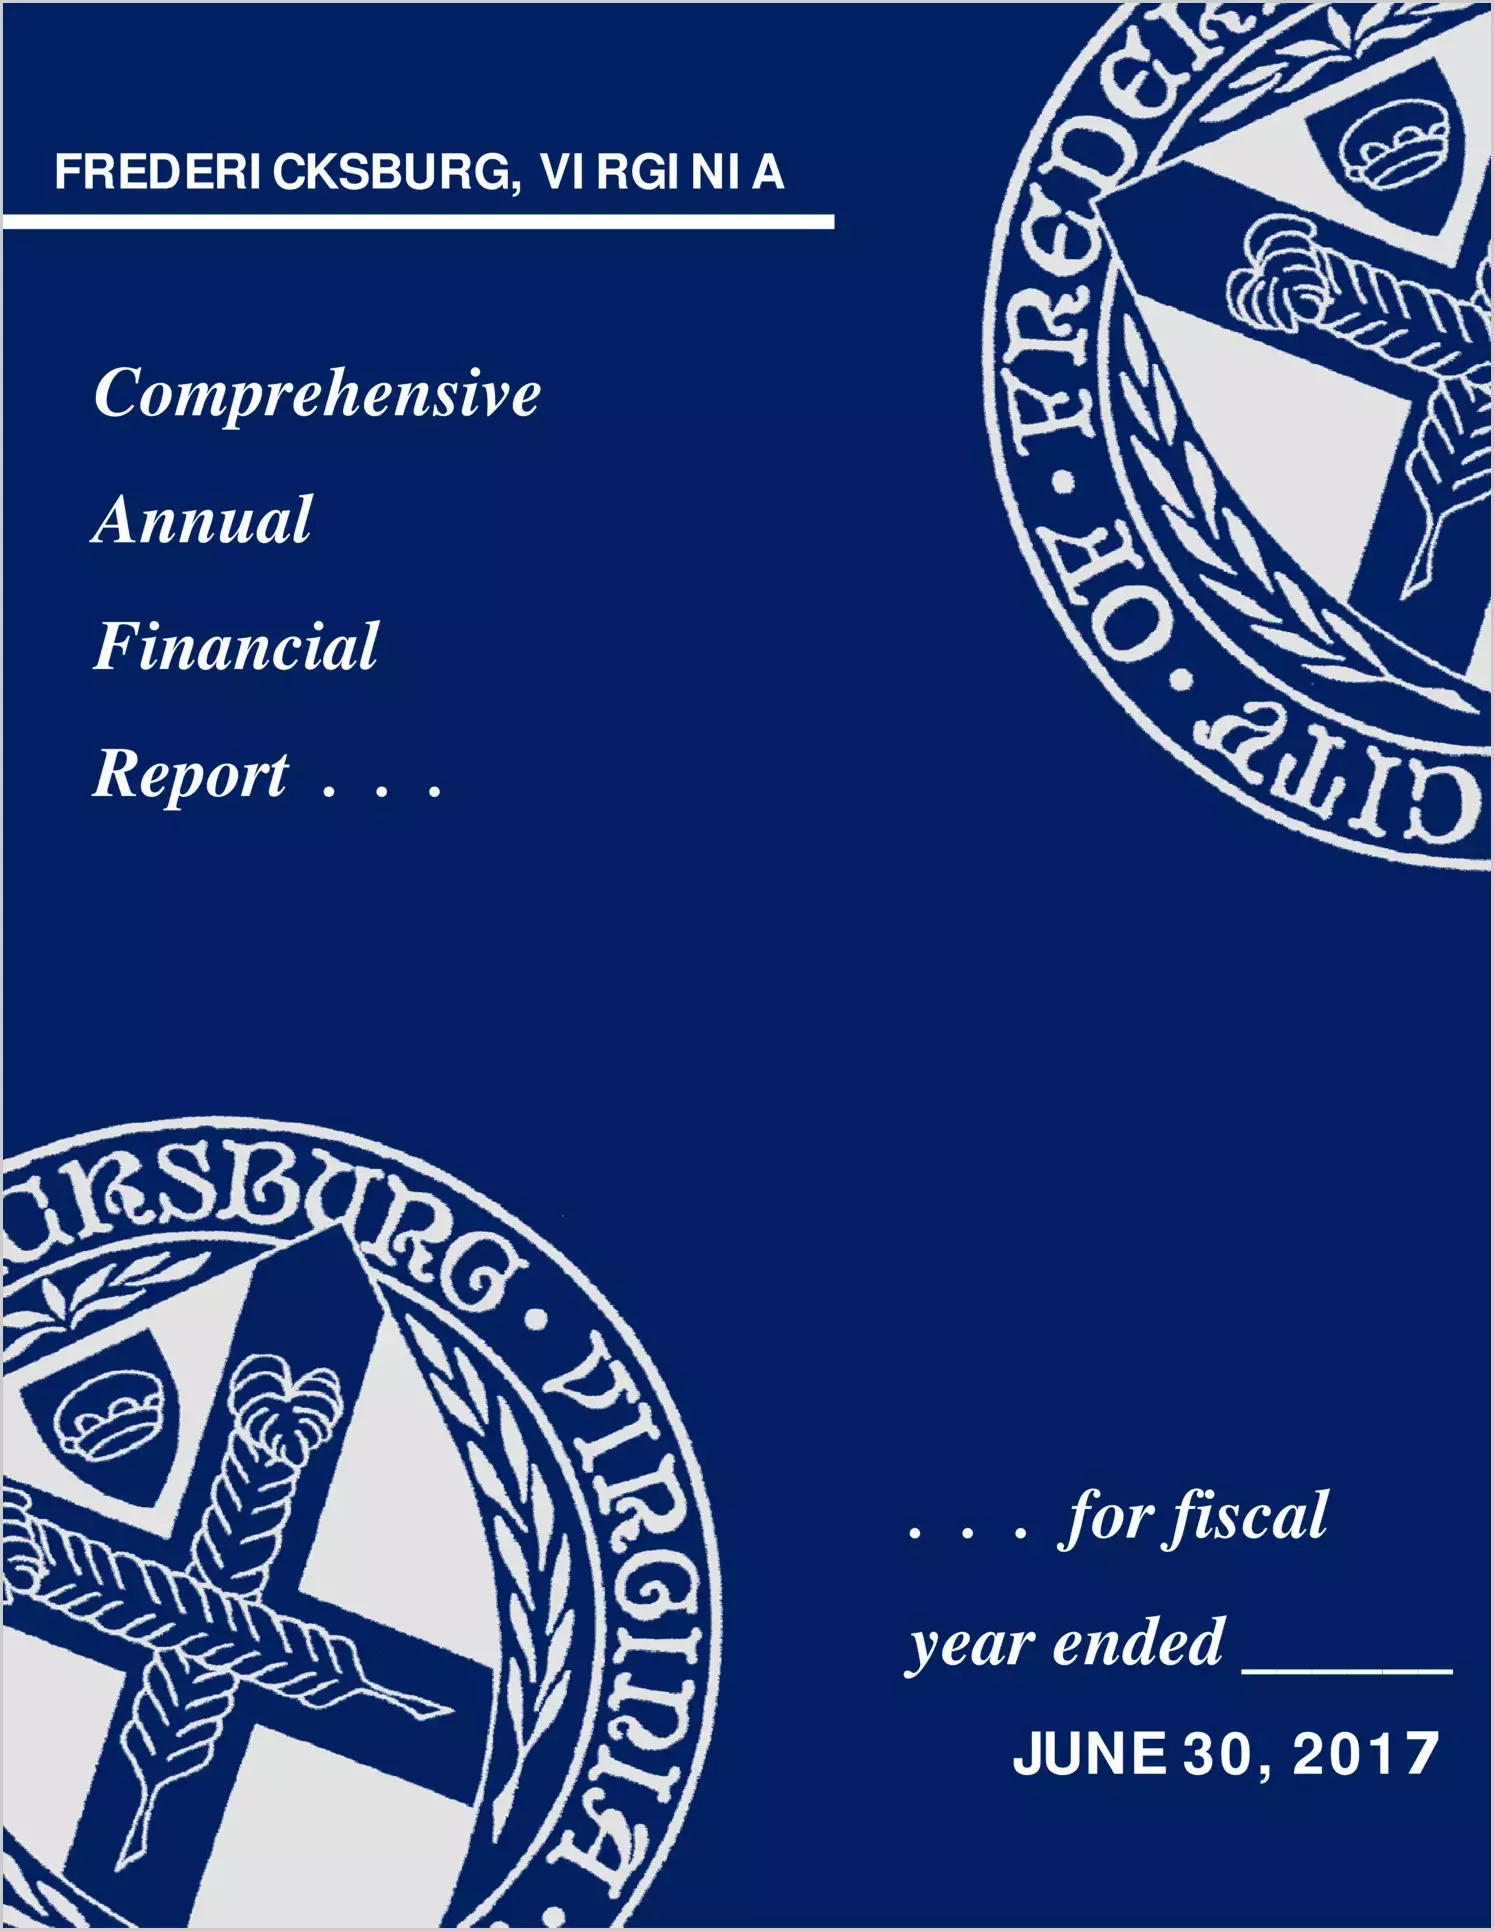 2017 Annual Financial Report for City of Fredericksburg